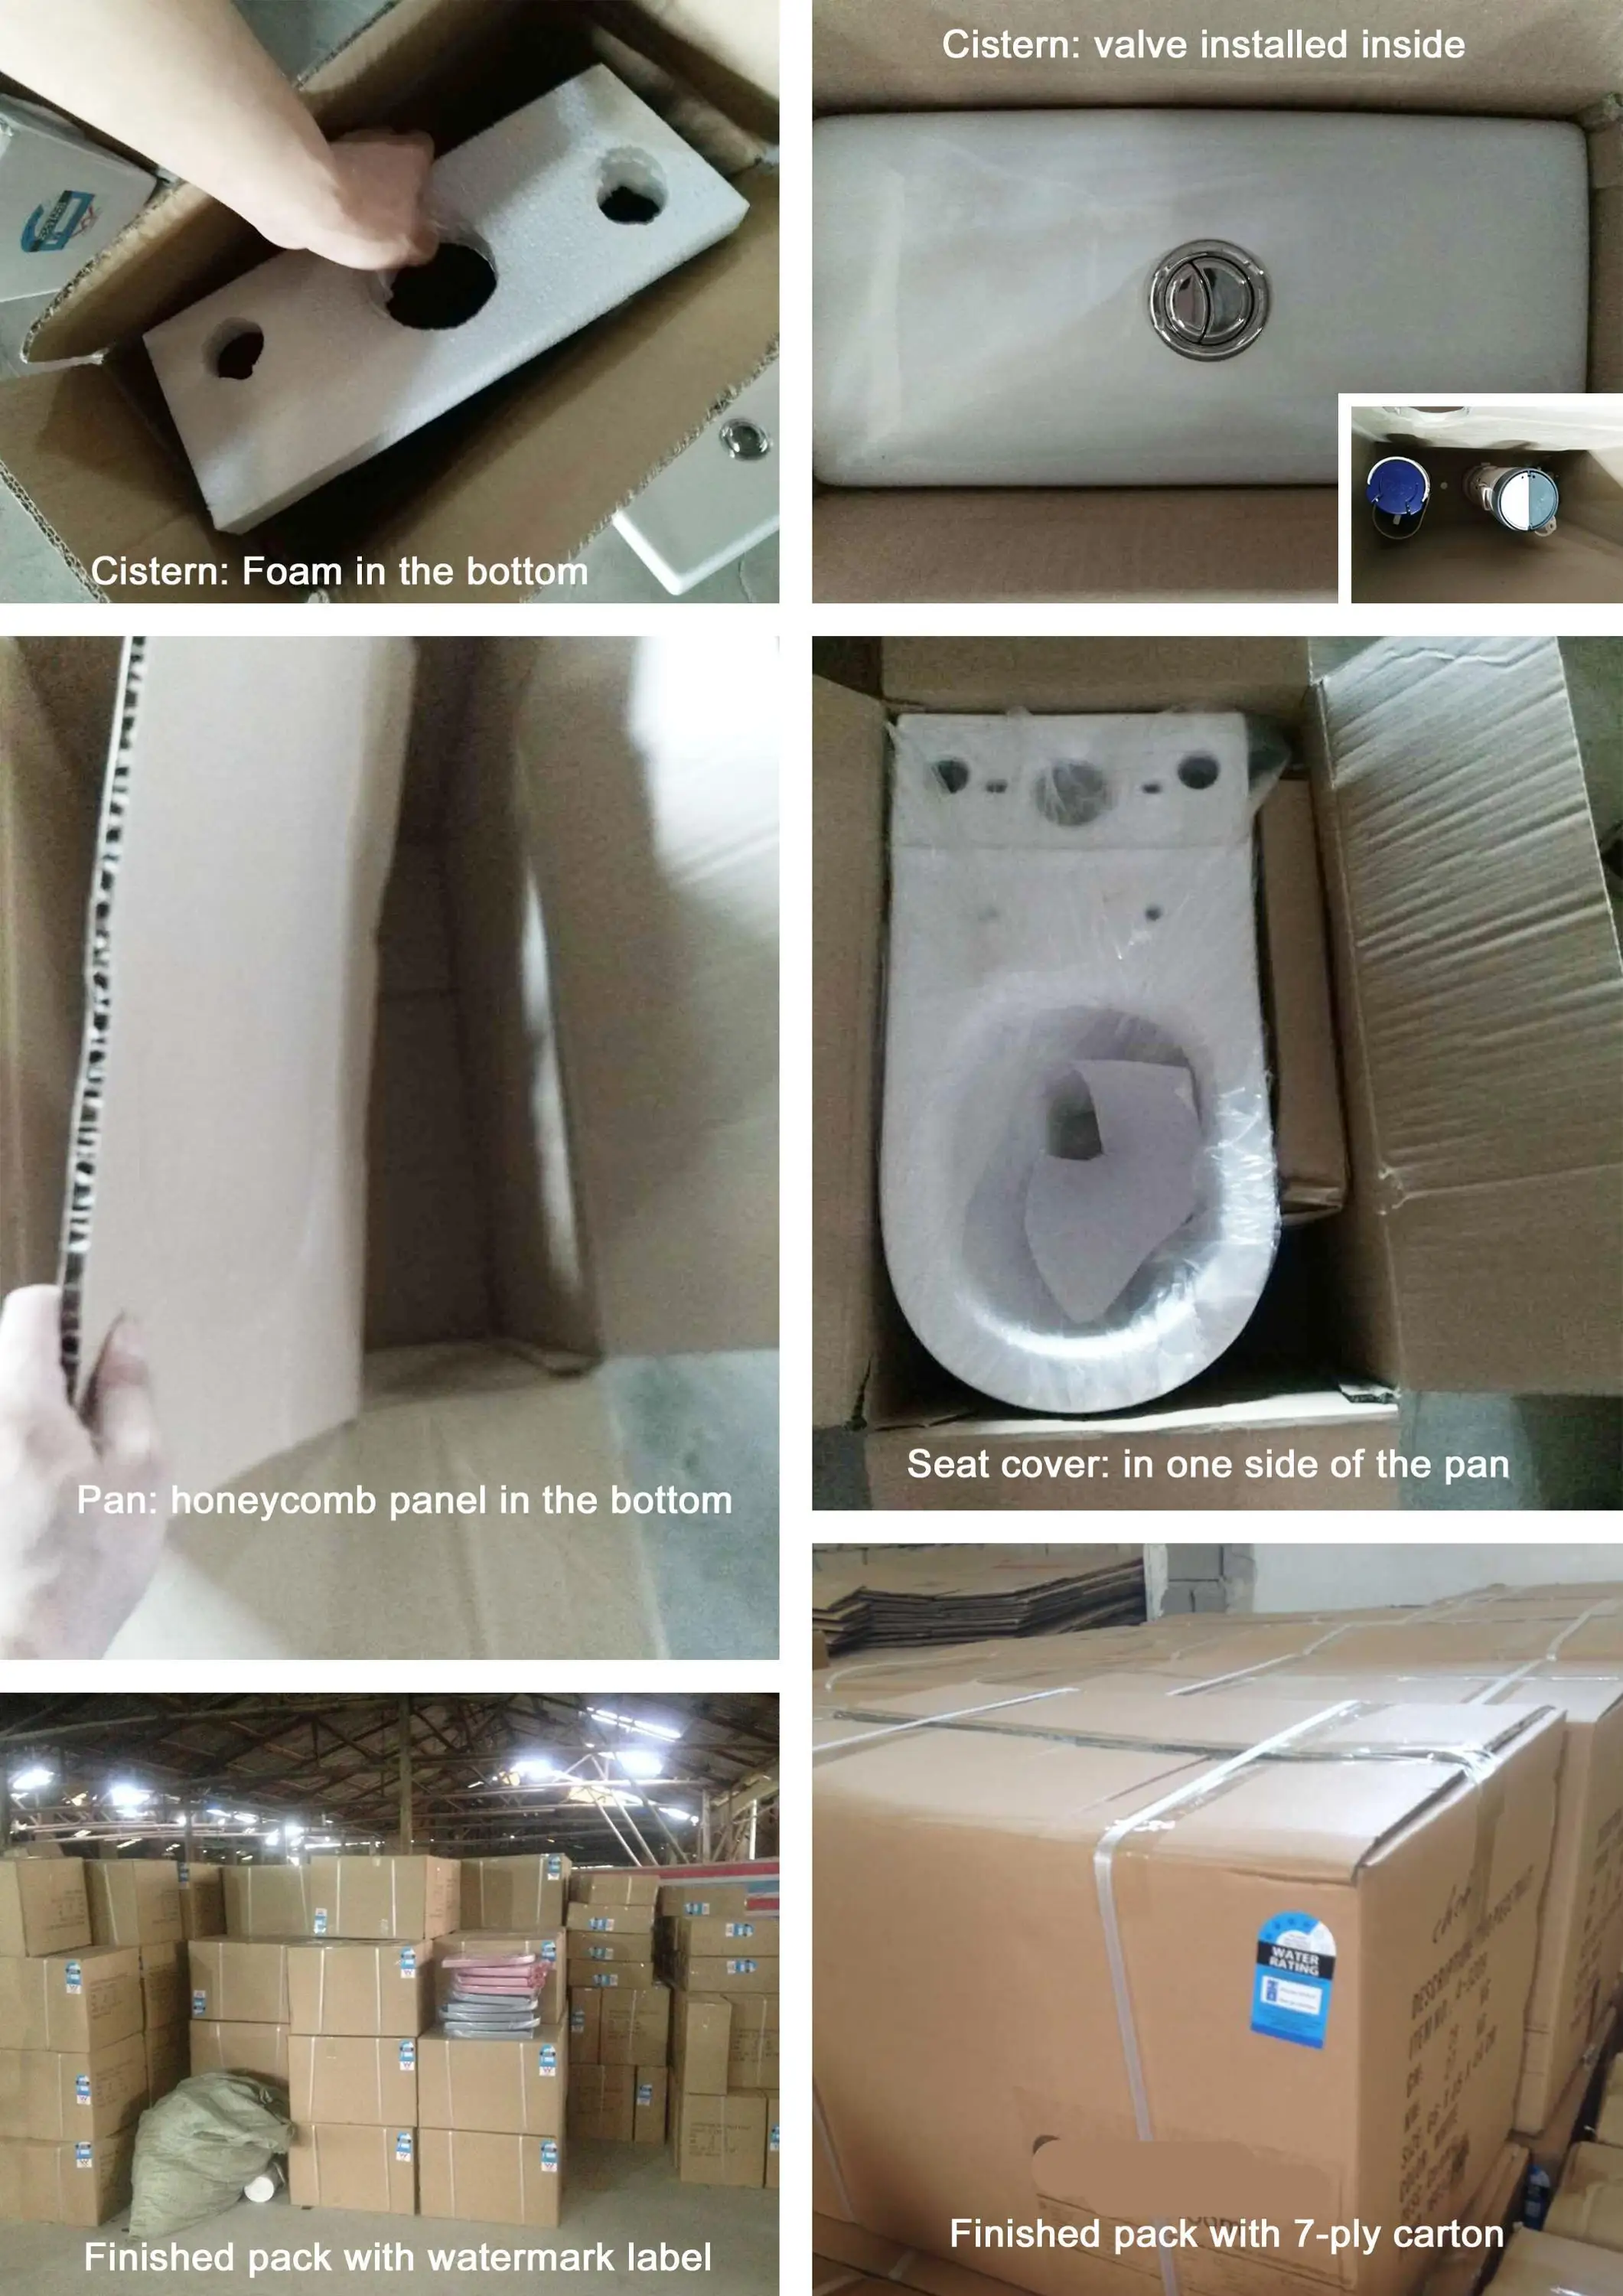 Chaozhou ceramic factory watermark toilet for bathroom equipment A3970B